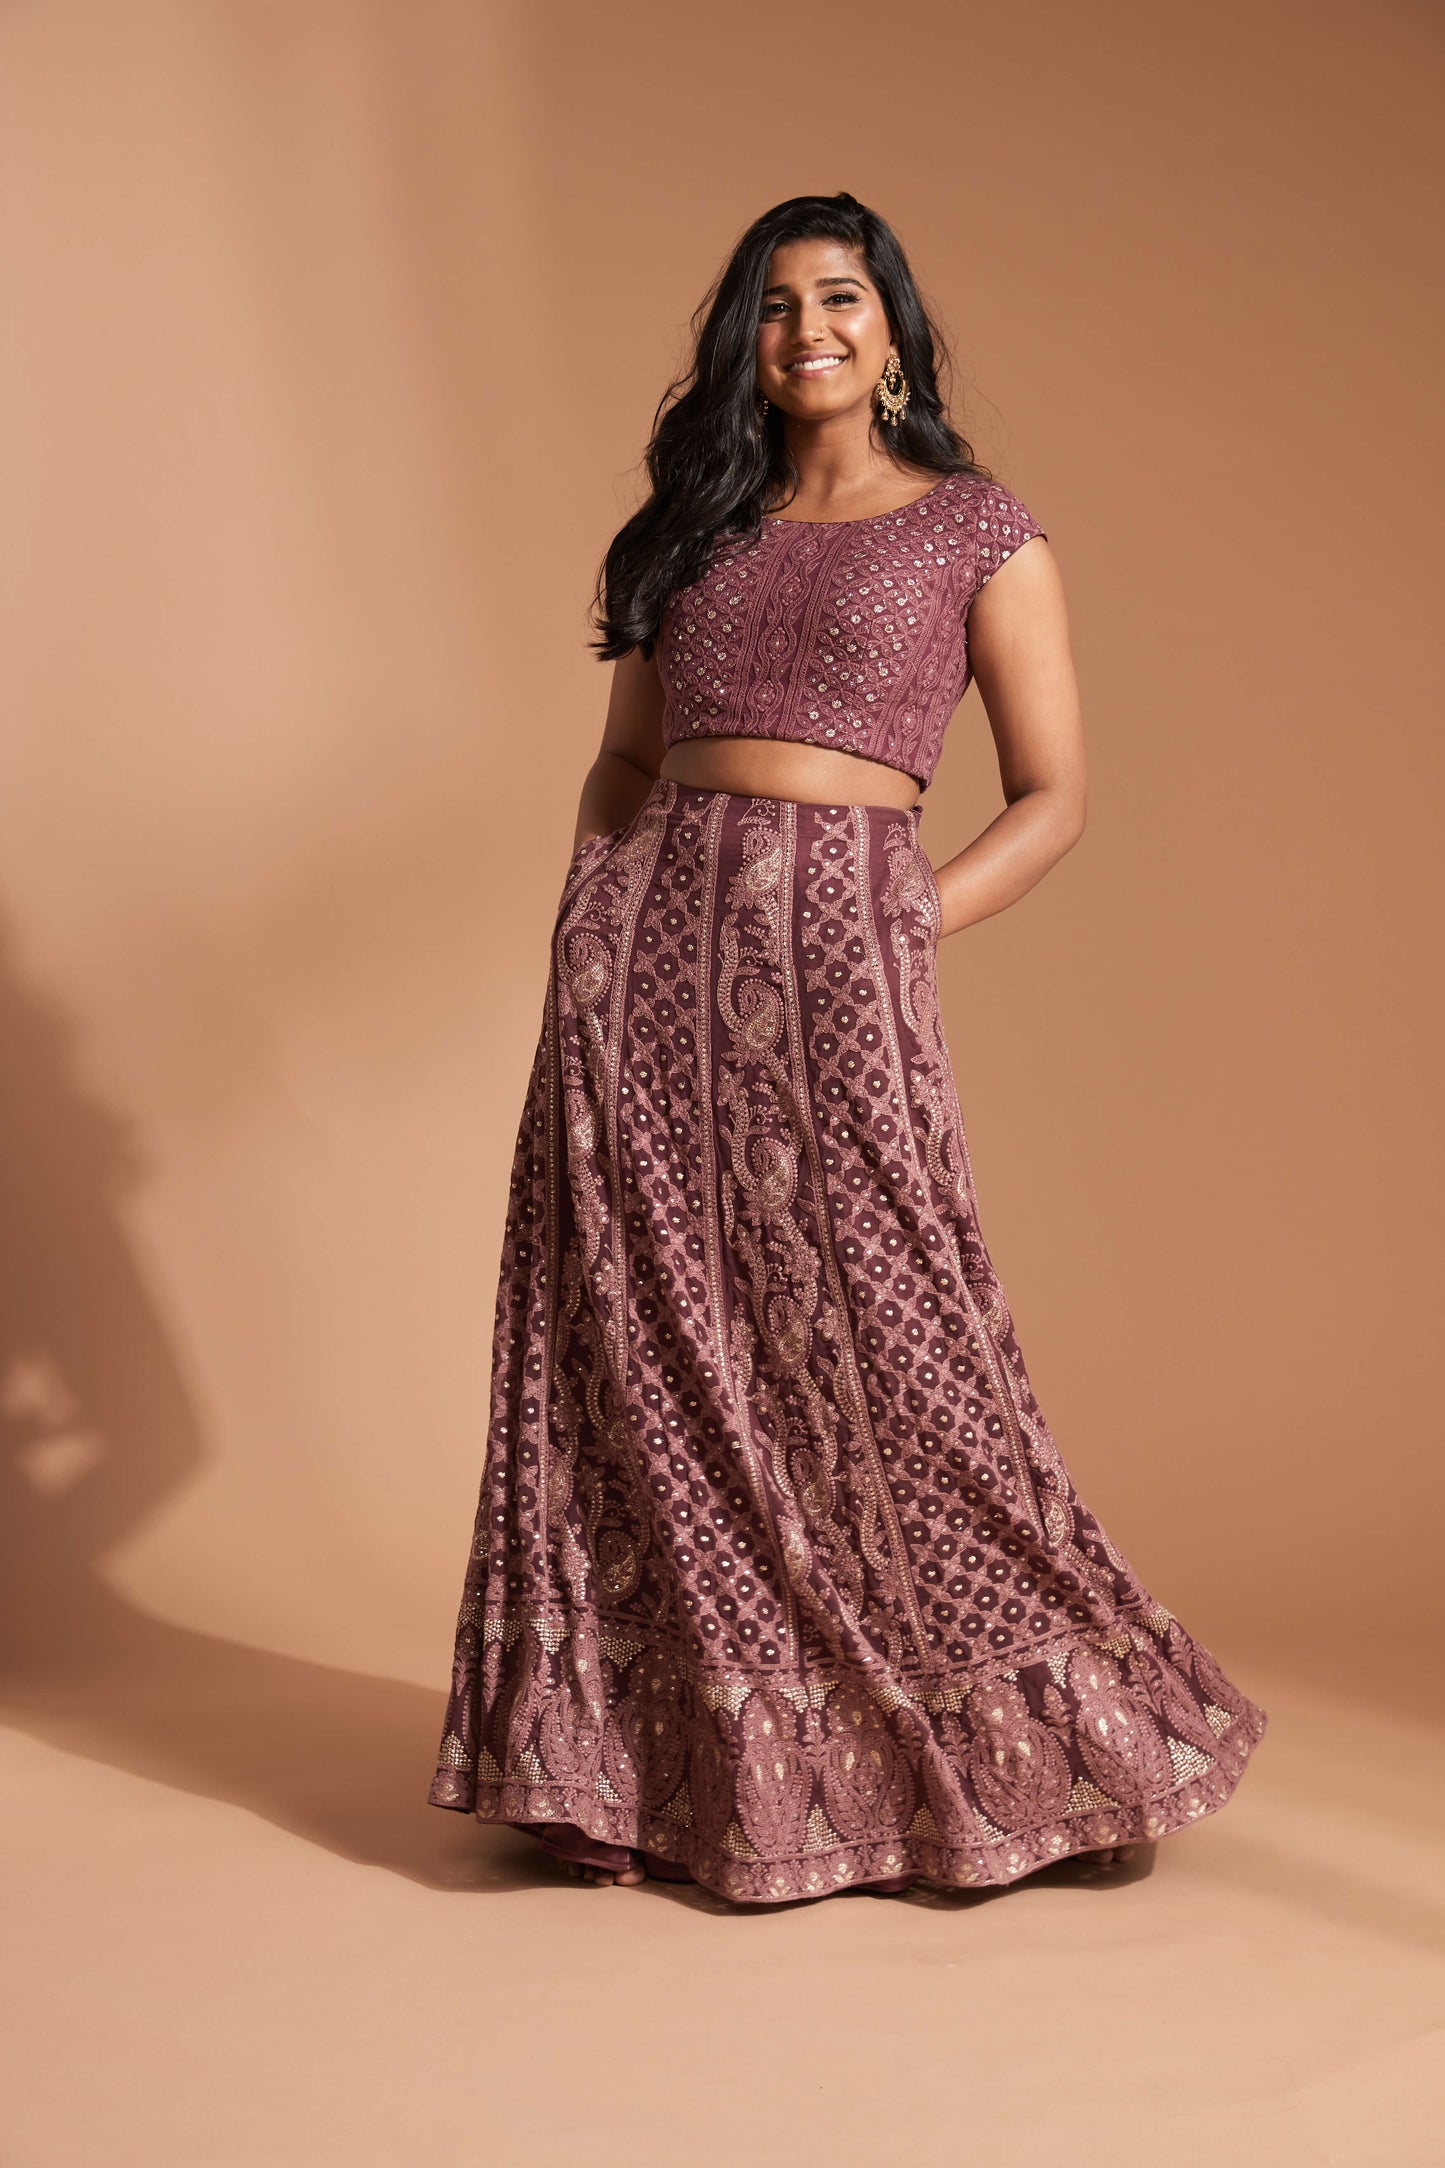 Burgundy lehenga made with lucknowi/chikankari work and featuring a cap sleeve blouse and cream scallop dupatta